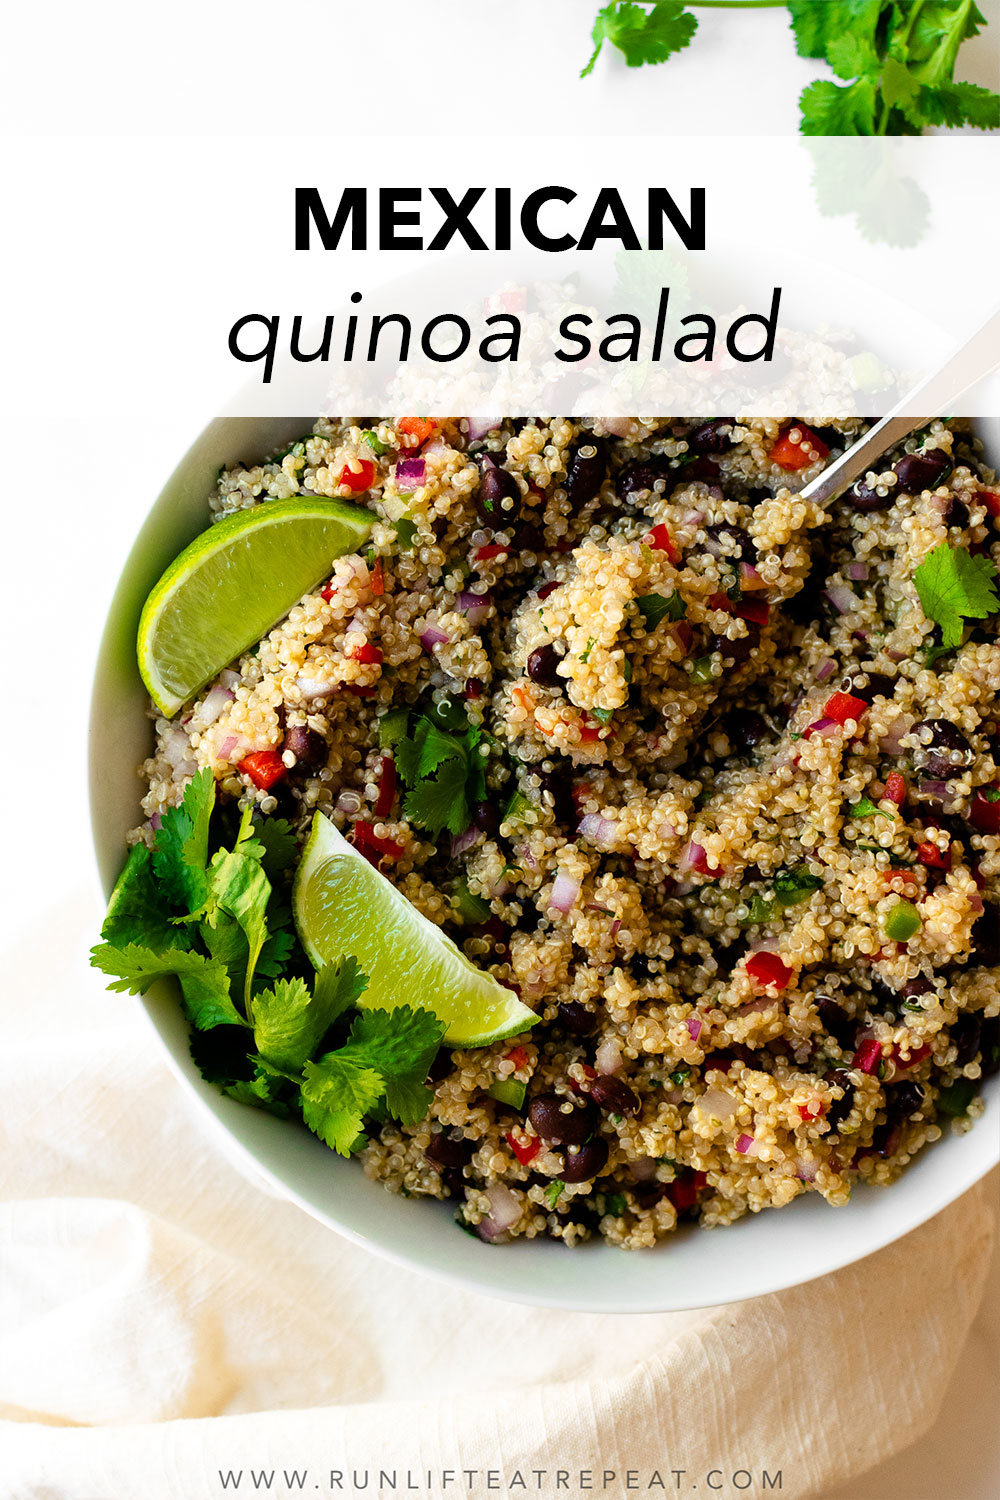 This vibrant and fresh Mexican quinoa salad – essentially a party in a bowl, if you will. Loaded with quinoa, bell peppers, red onions, black beans, and combined with a fresh cilantro lime dressing. This bold flavored dish will enhance any meal.